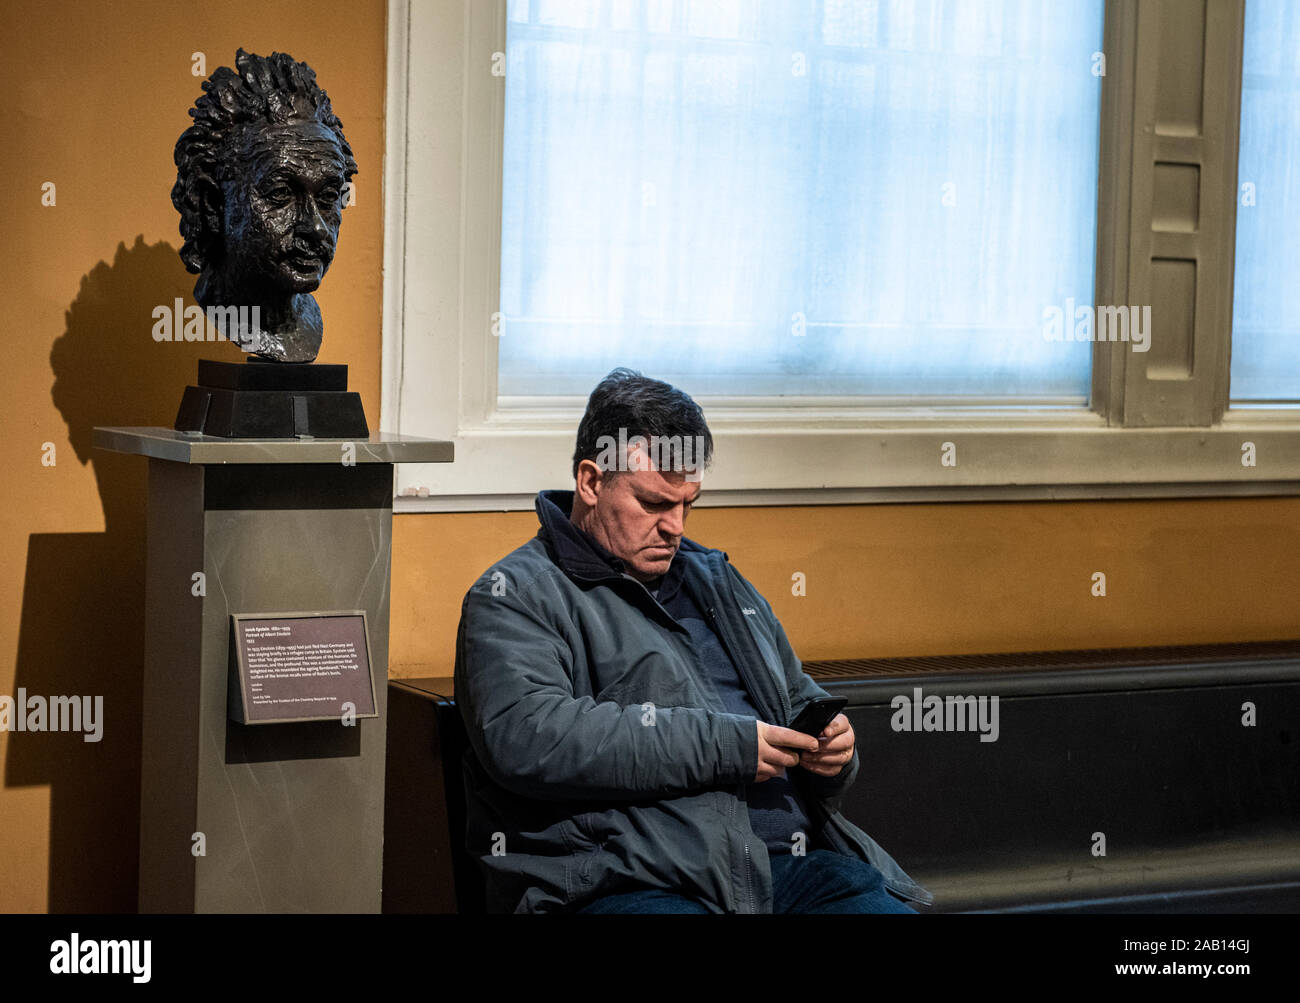 Man sitting on bench using mobile phone with sculpture of Einstein on plinth. Victoria and Albert Museum, South Kensington, London, England, UK. Stock Photo